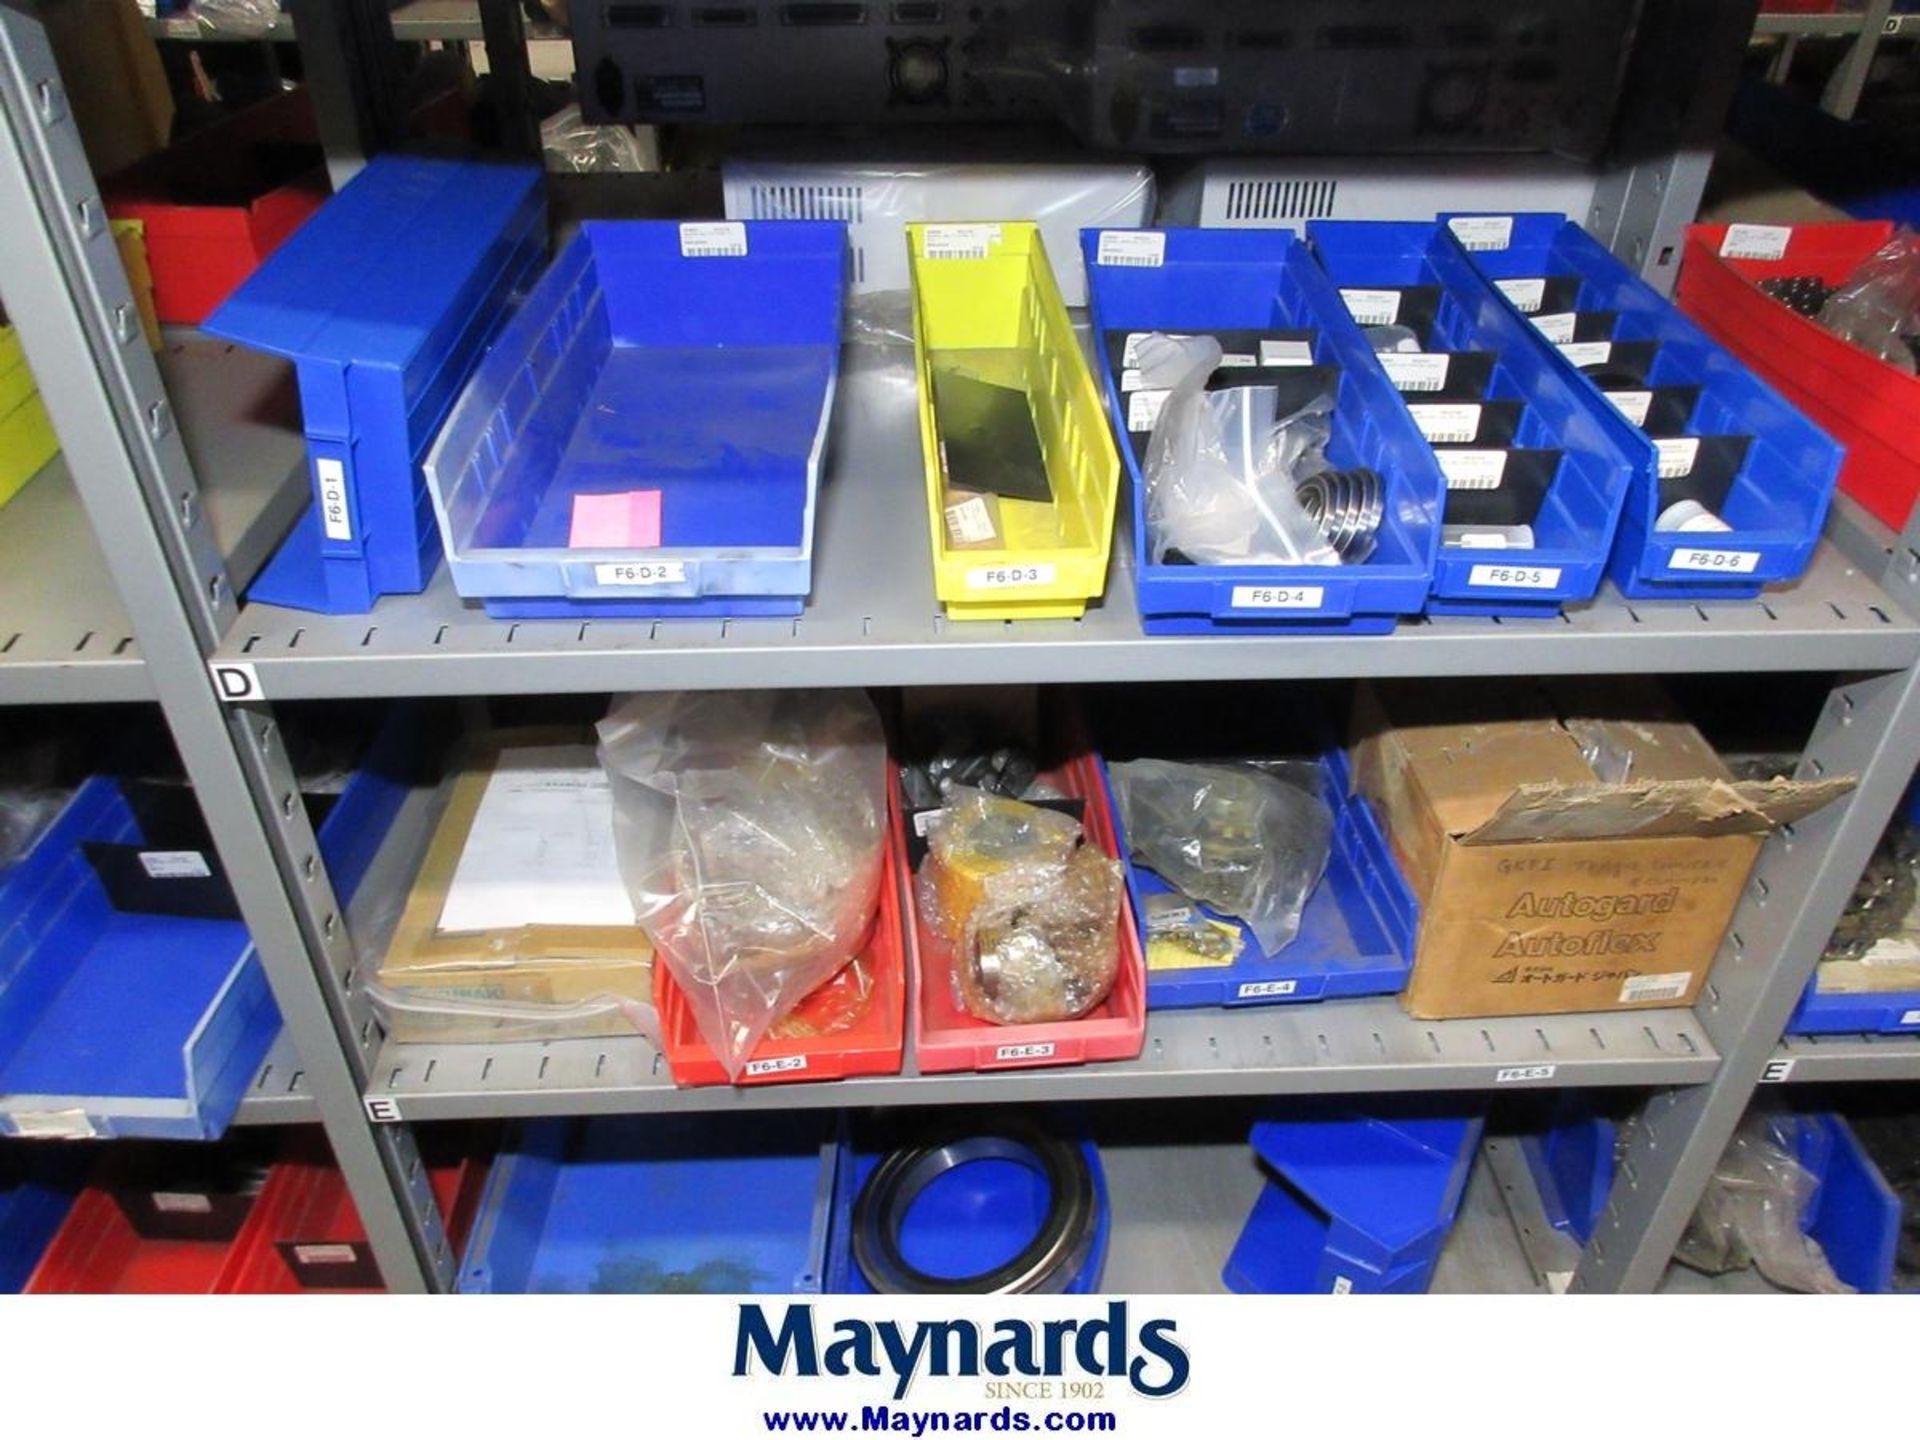 Large Lot of Electrical Controls, PLC's, Drives & Remaining Contents of Maint. Parts Crib - Image 75 of 107